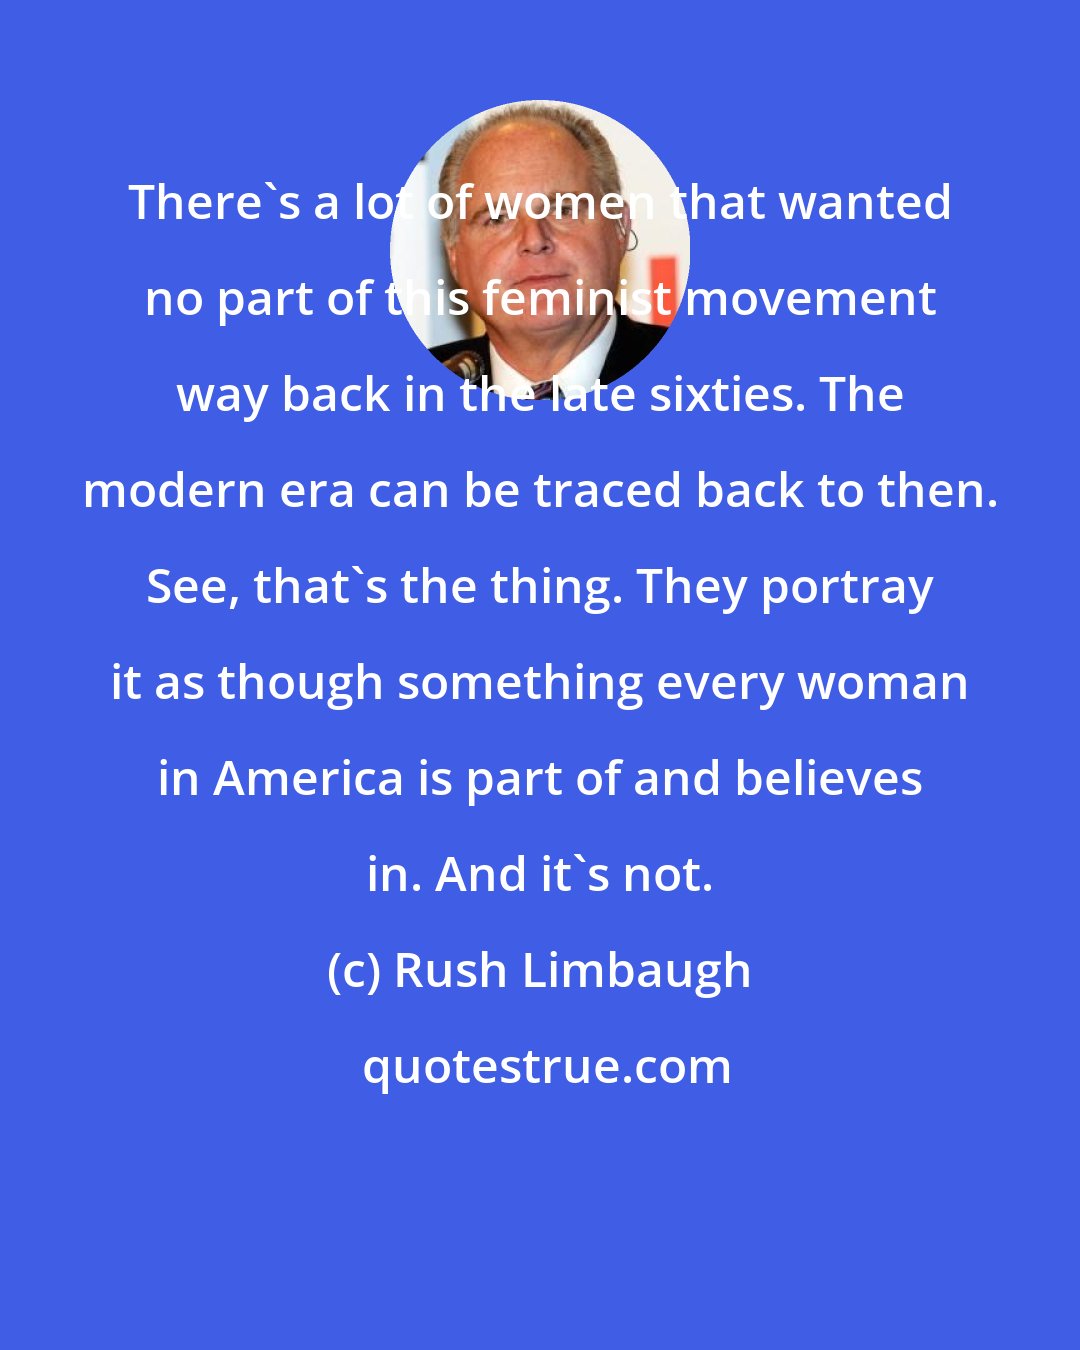 Rush Limbaugh: There's a lot of women that wanted no part of this feminist movement way back in the late sixties. The modern era can be traced back to then. See, that's the thing. They portray it as though something every woman in America is part of and believes in. And it's not.